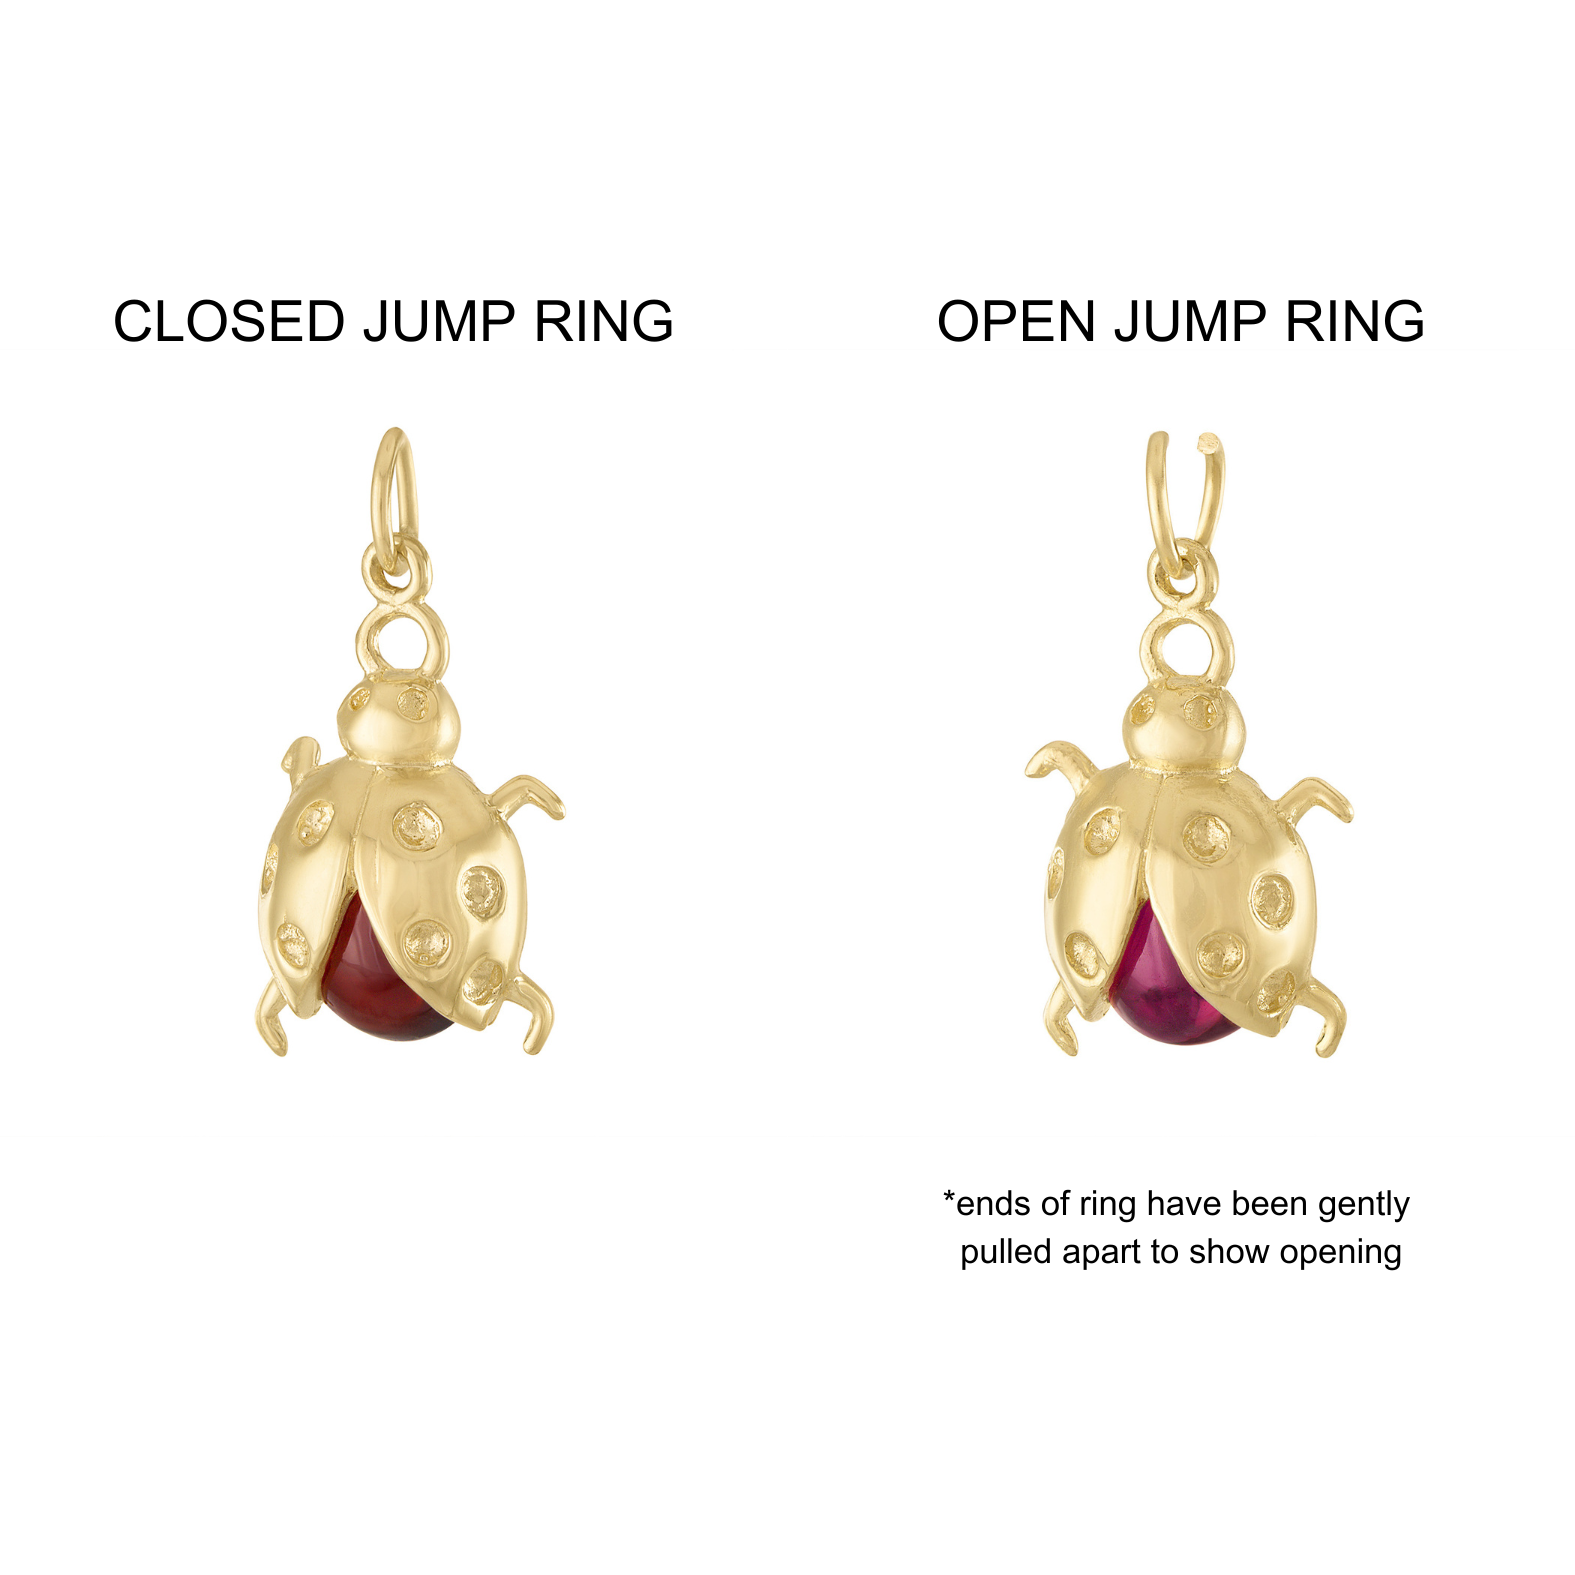 Charm Fixing And Fitting Guide - Scarlett Jewellery